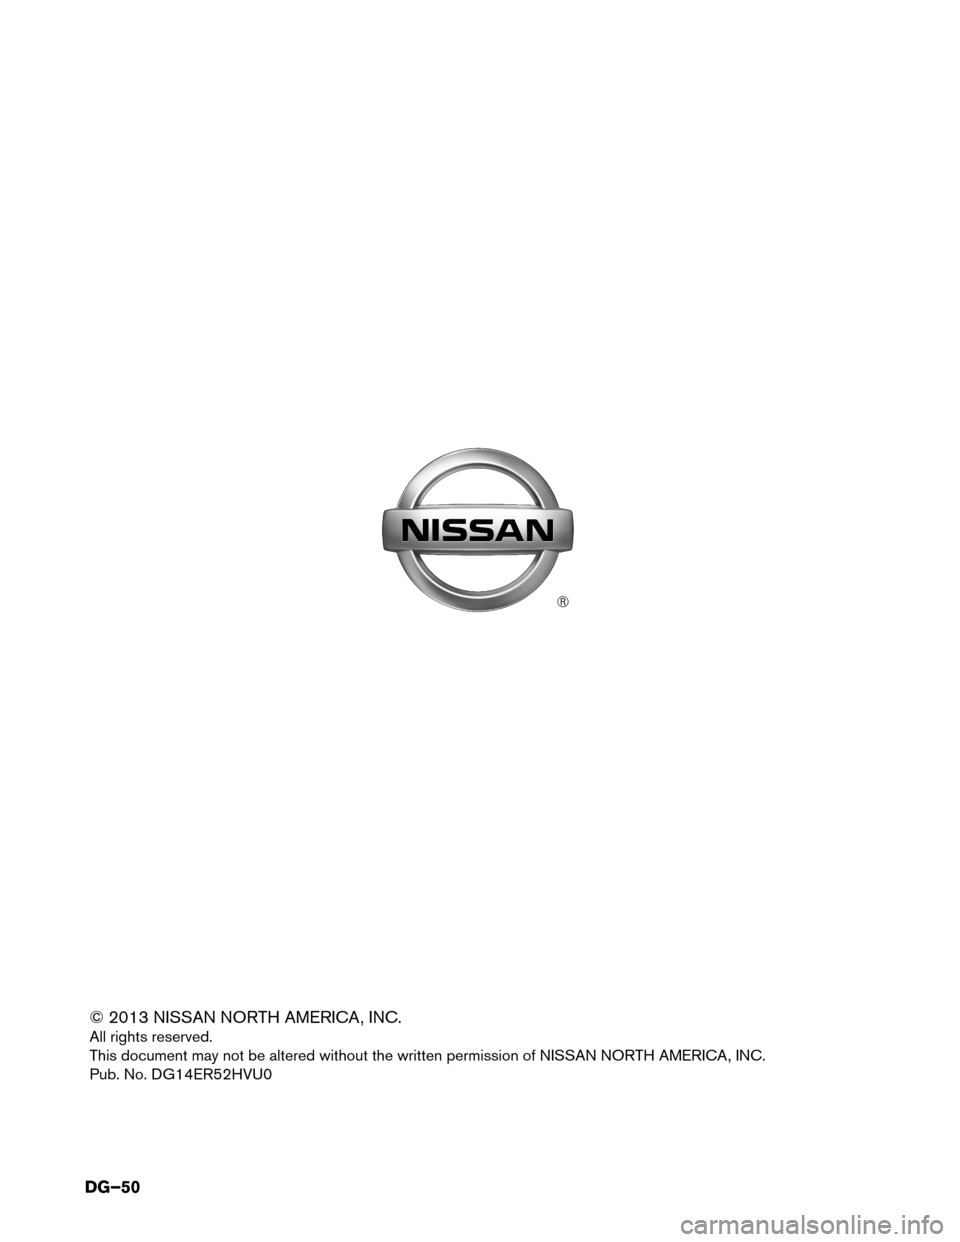 NISSAN PATHFINDER HYBRID 2014 R52 / 4.G Dismantling Guide © 2013 NISSAN NORTH AMERICA, INC. 
All rights reserved. 
This document may not be altered without the written permission of NISSAN NORTH AMERICA, INC.
Pub. No. DG14ER52HVU0
DG–50  